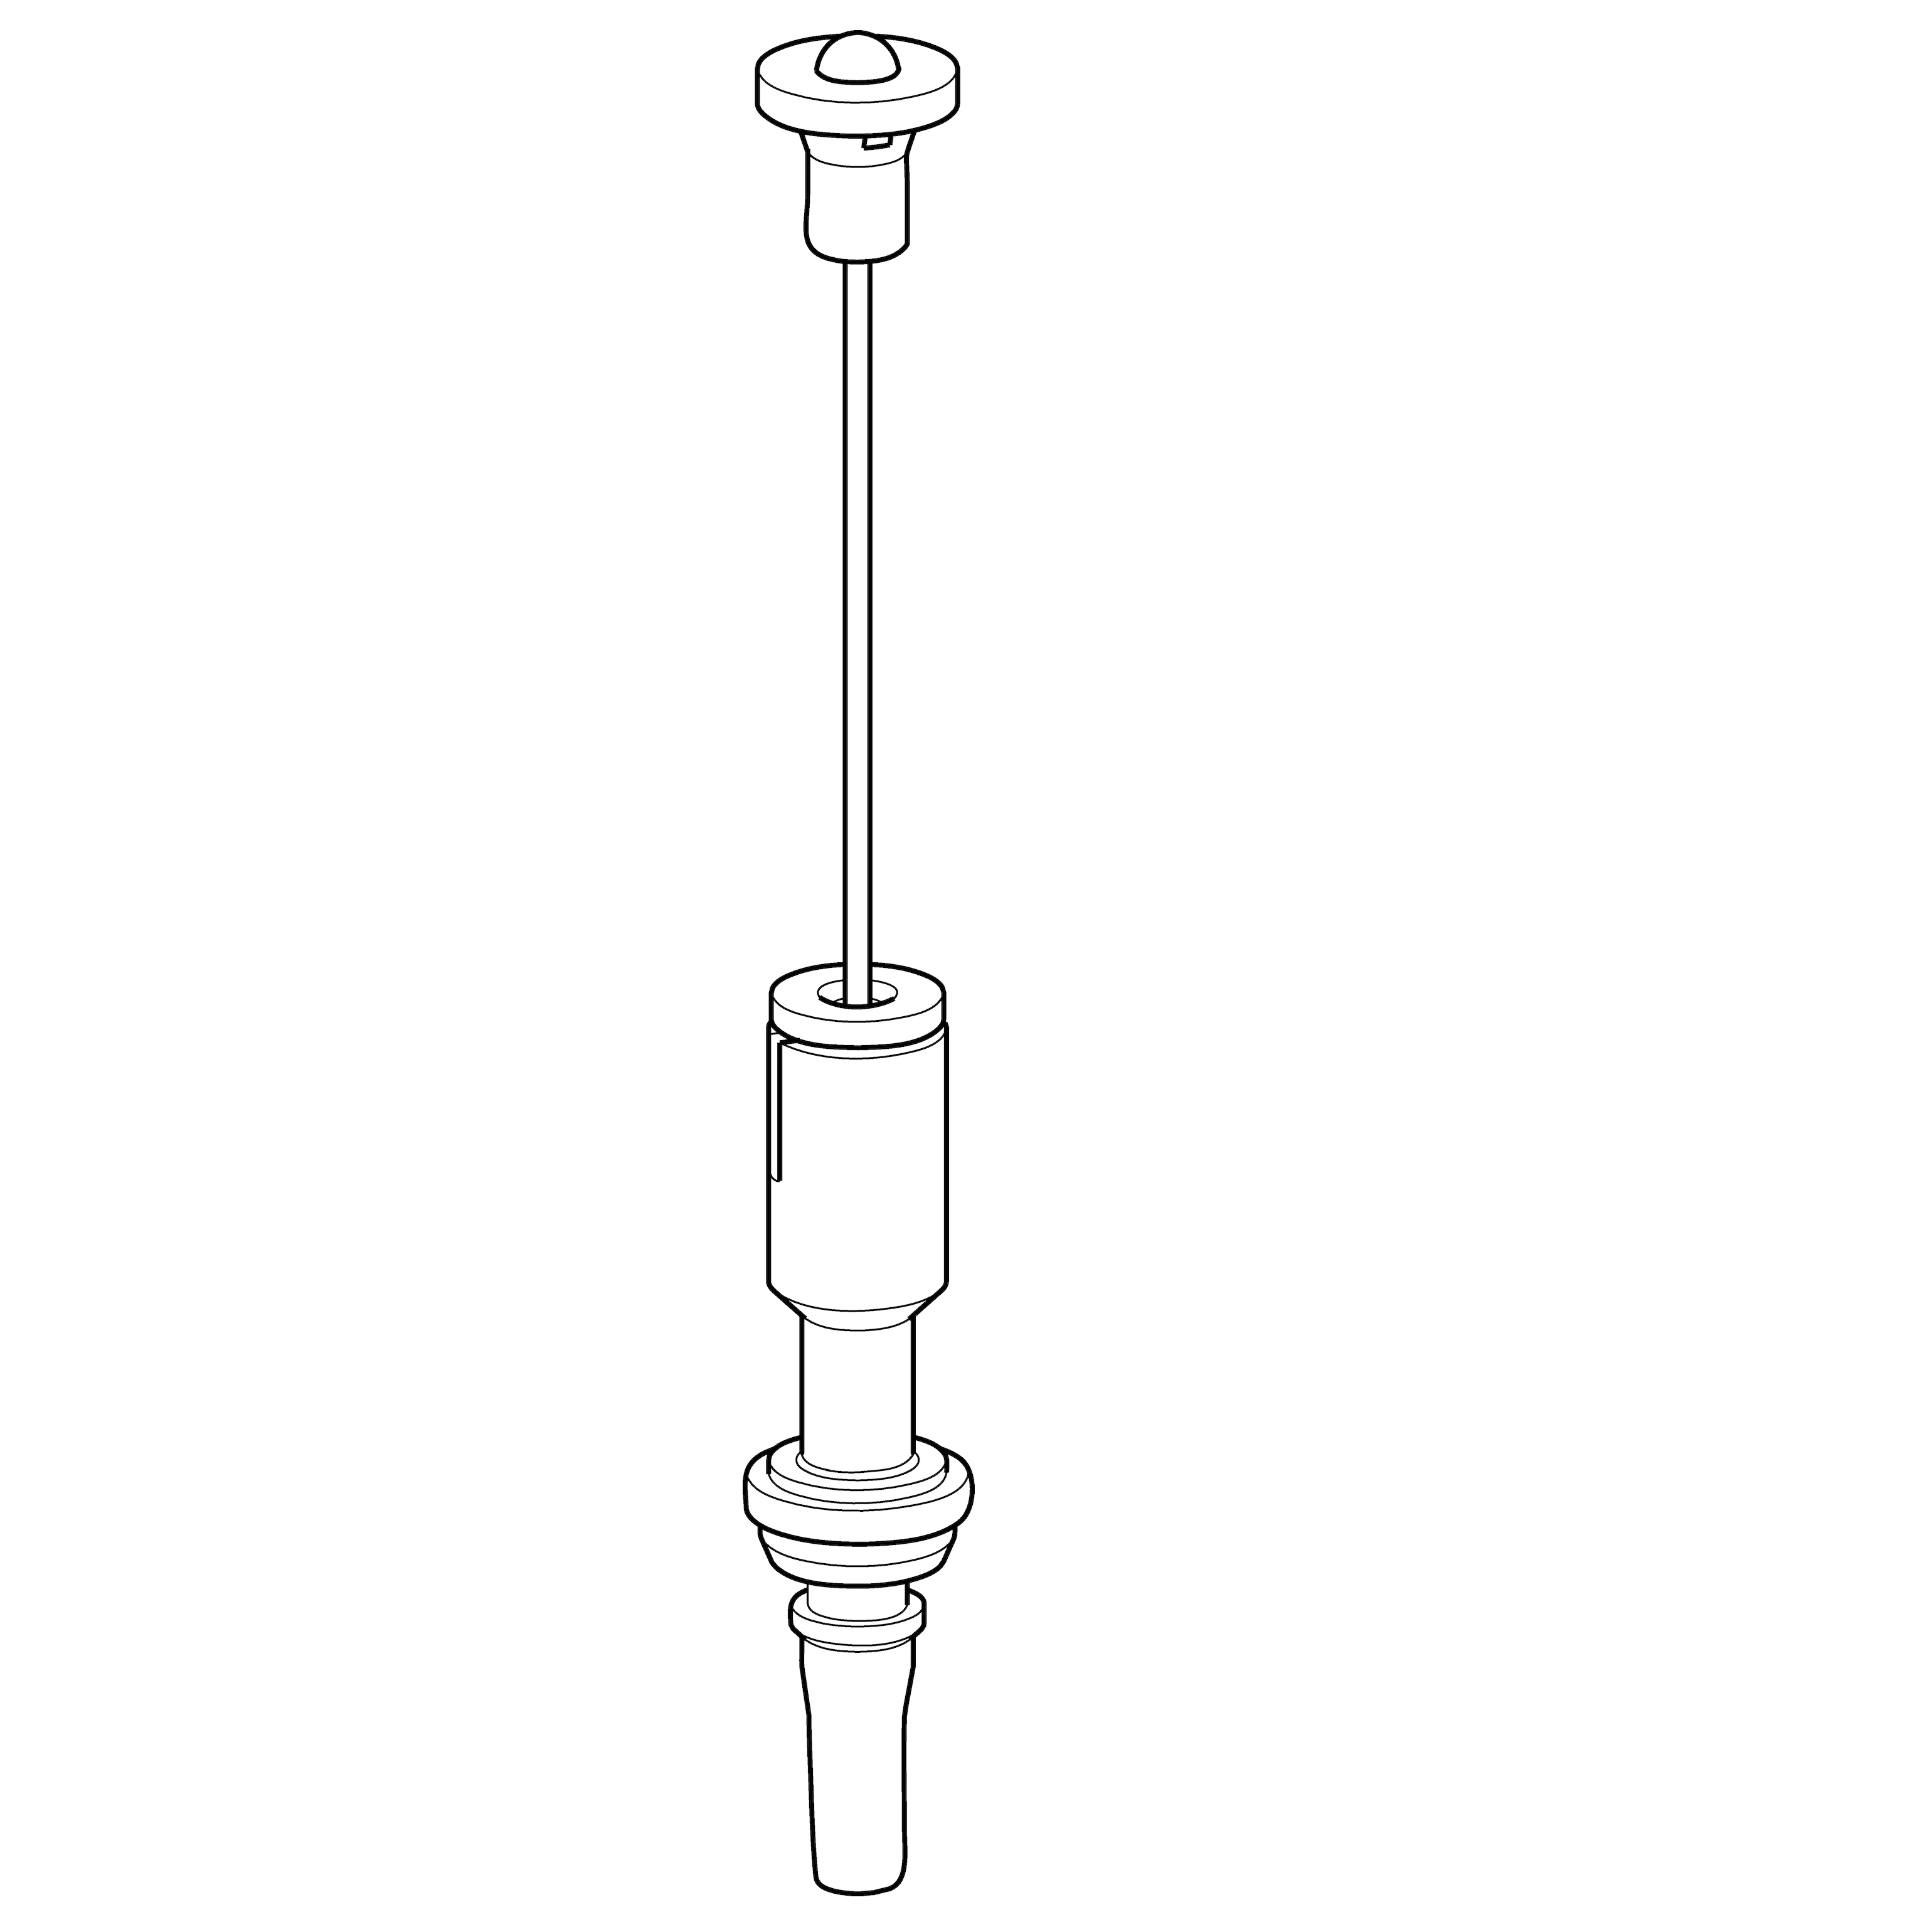 Eppendorf, Replacement channel for multi-channel lower parts, includes piston, cylinder, tip spring, O-ring, 300 µL, color code: orange, for multi-channel 30 – 300 µL, For Eppendorf Reference® 2